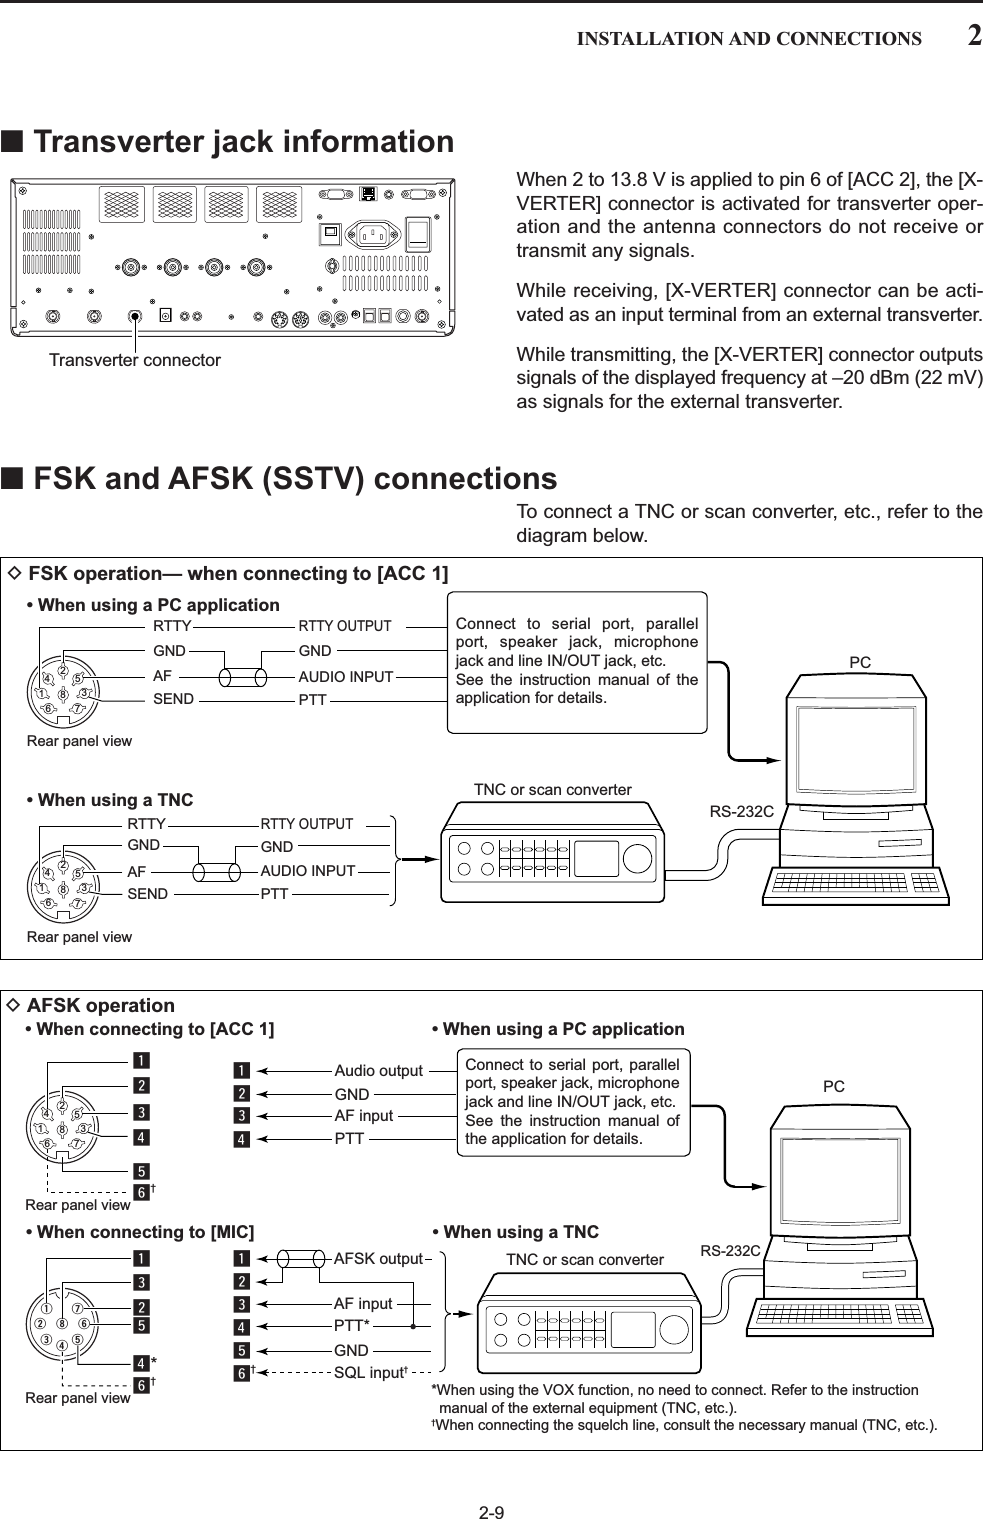 2-92INSTALLATION AND CONNECTIONS■Transverter jack informationWhen 2 to 13.8 V is applied to pin 6 of [ACC 2], the [X-VERTER] connector is activated for transverter oper-ation and the antenna connectors do not receive ortransmit any signals.While receiving, [X-VERTER] connector can be acti-vated as an input terminal from an external transverter.While transmitting, the [X-VERTER] connector outputssignals of the displayed frequency at –20 dBm (22 mV)as signals for the external transverter.■FSK and AFSK (SSTV) connectionsTo connect a TNC or scan converter, etc., refer to thediagram below.Connect to serial port, parallel port, speaker jack, microphone jack and line IN/OUT jack, etc.See the instruction manual of the application for details.D AFSK operation• When connecting to [ACC 1]• When connecting to [MIC]• When using a PC application• When using a TNCPCRS-232CTNC or scan converterPTTAudio outputAF inputGNDAFSK outputAF inputGNDPTT*SQL input†*When using the VOX function, no need to connect. Refer to the instruction   manual of the external equipment (TNC, etc.).†When connecting the squelch line, consult the necessary manual (TNC, etc.).qwertyui12345678zzxxccvv*zxcvzxcvbbn†n†bn†Rear panel viewRear panel viewPCRS-232CTNC or scan converterConnect to serial port, parallel port, speaker jack, microphone jack and line IN/OUT jack, etc.See the instruction manual of the application for details.DFSK operation— when connecting to [ACC 1]• When using a PC application• When using a TNC12345678Rear panel viewRear panel viewRTTYGNDAFSENDRTTYGNDAFSENDRTTY OUTPUTGNDAUDIO INPUTPTTRTTY OUTPUTGNDAUDIO INPUTPTT12345678Transverter connector